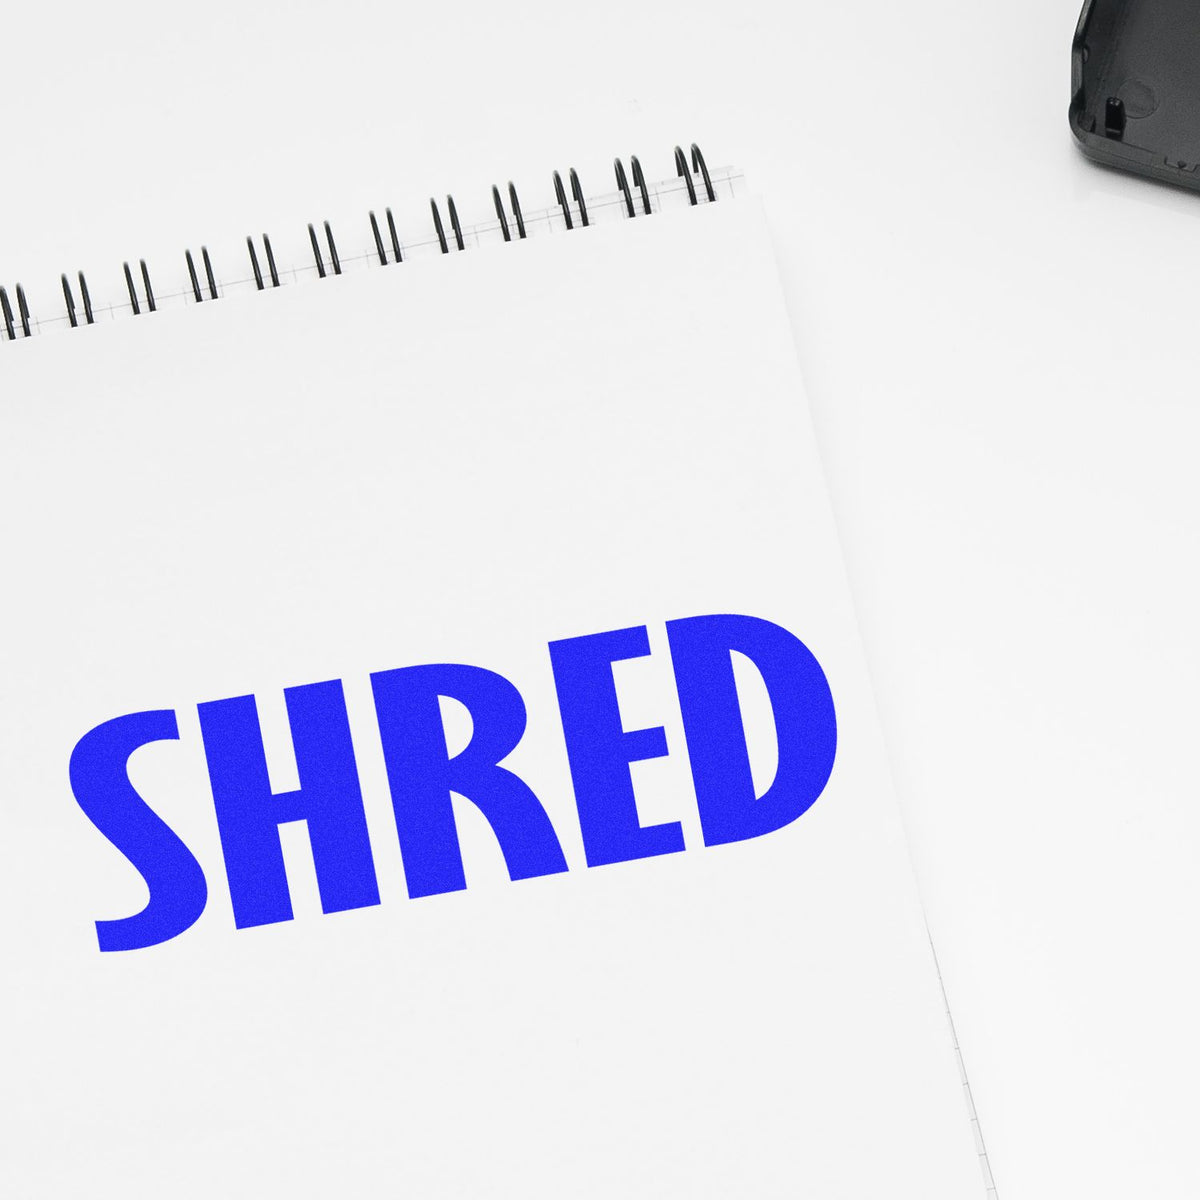 Large Shred Rubber Stamp In Use Photo